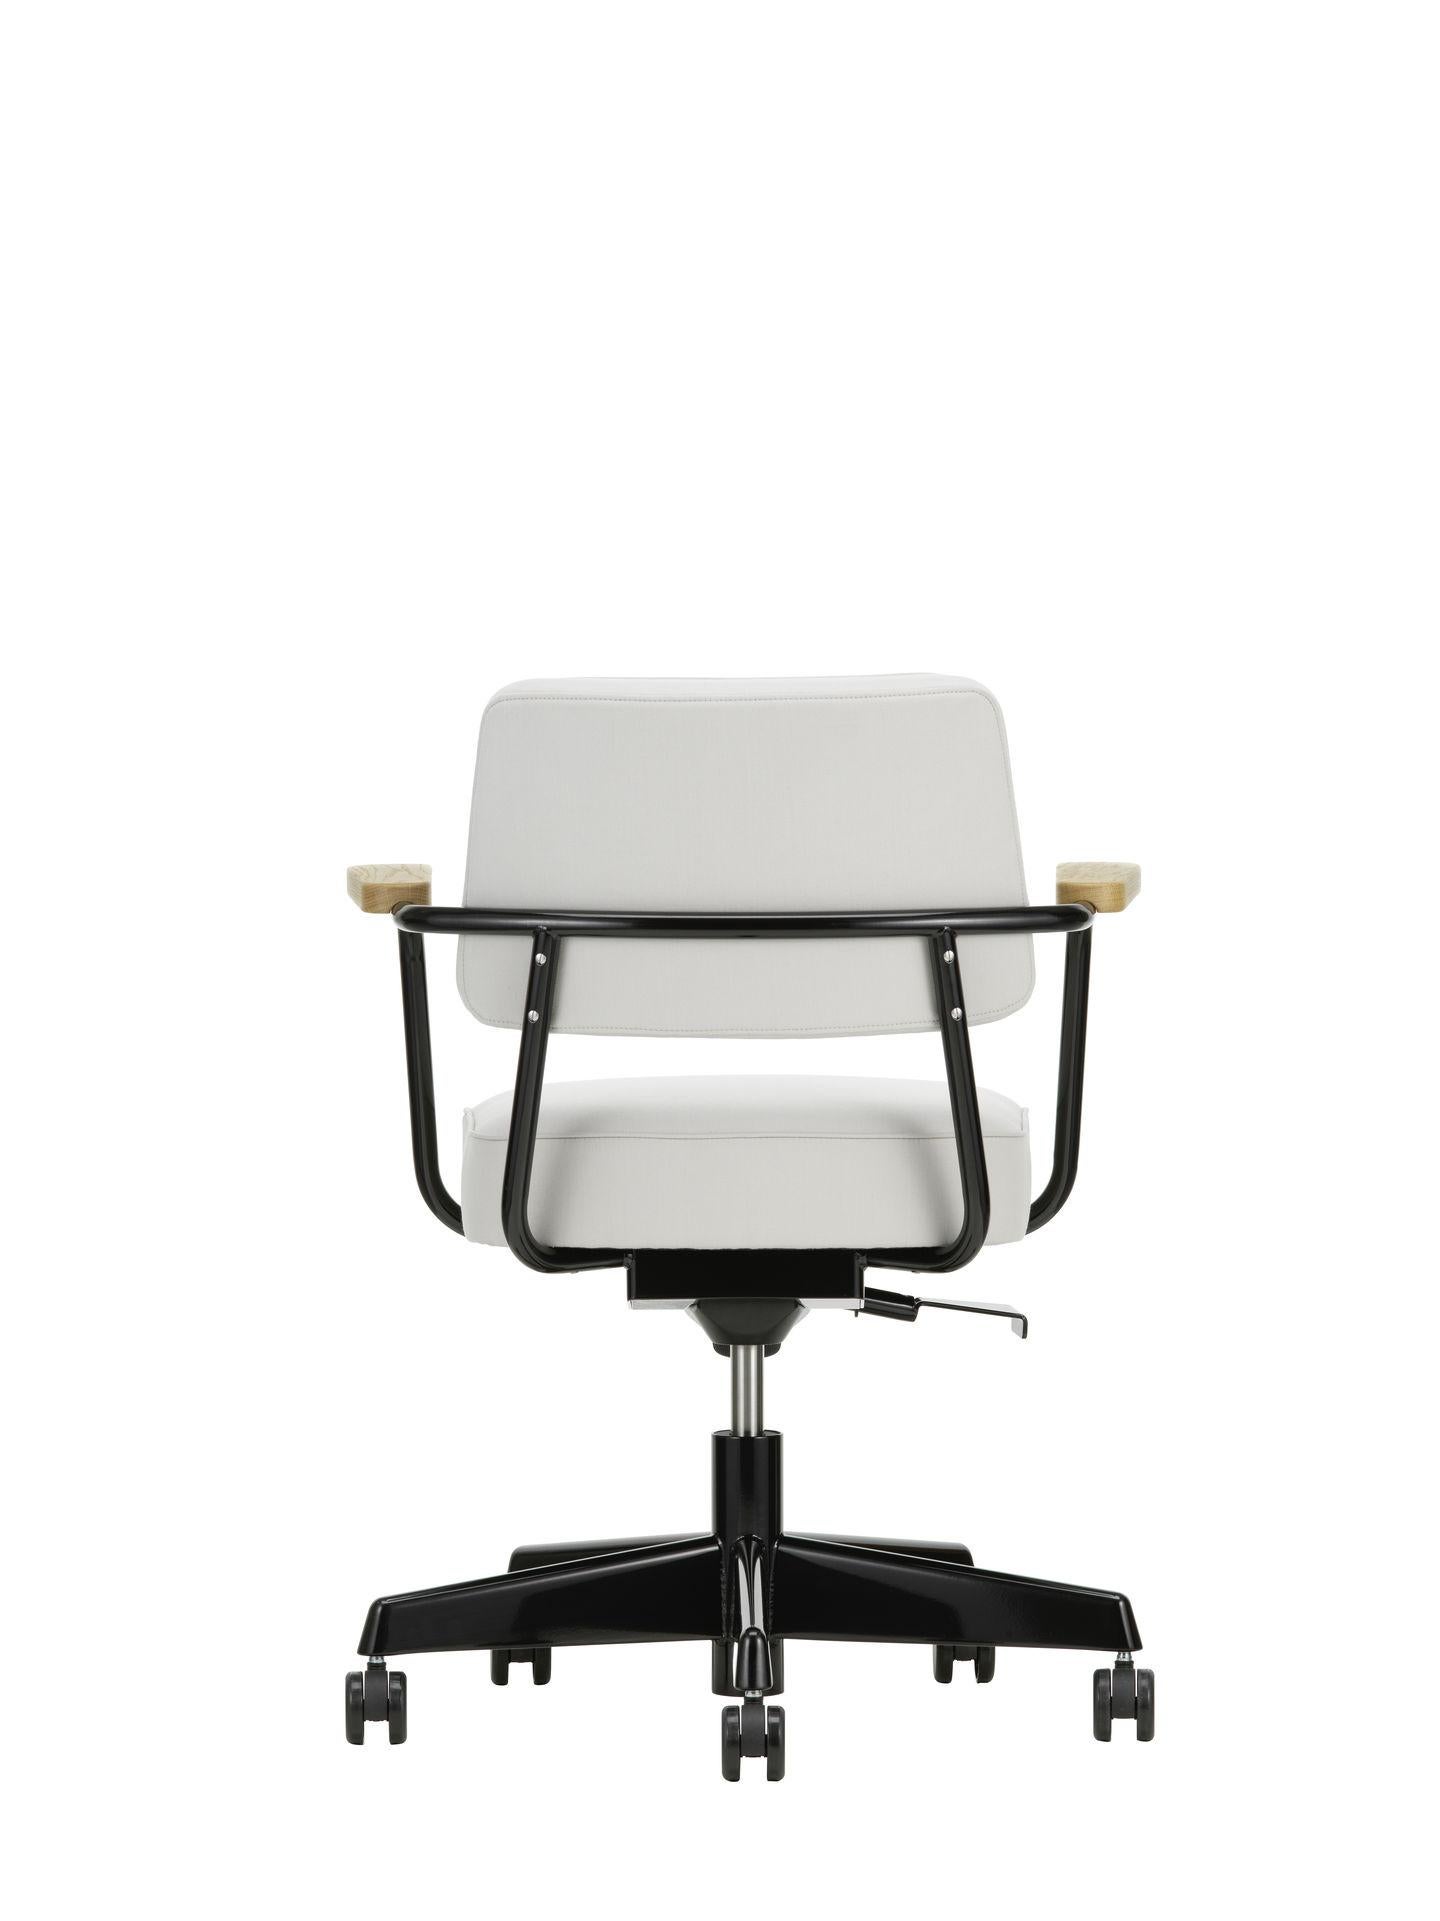 Leather Jean Prouvé Fauteuil Direction Pivotant Office Chair by Vitra